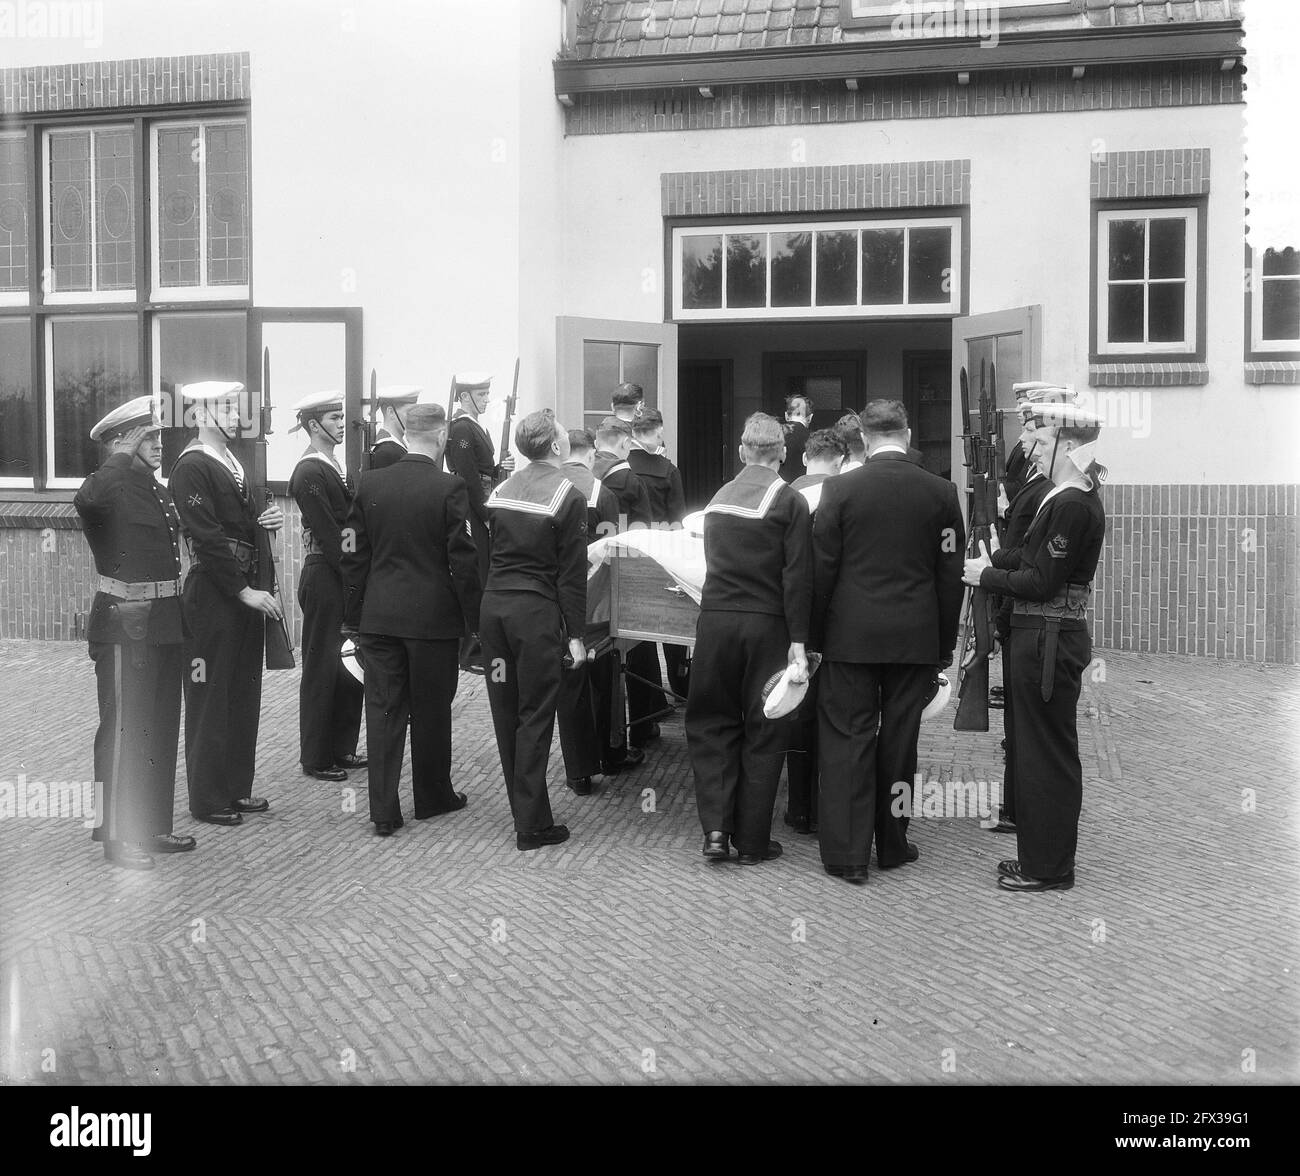 Military funeral skipper Jan Hendrik Simonis Den Helder, 5 July 1955, funerals, boatmen, The Netherlands, 20th century press agency photo, news to remember, documentary, historic photography 1945-1990, visual stories, human history of the Twentieth Century, capturing moments in time Stock Photo